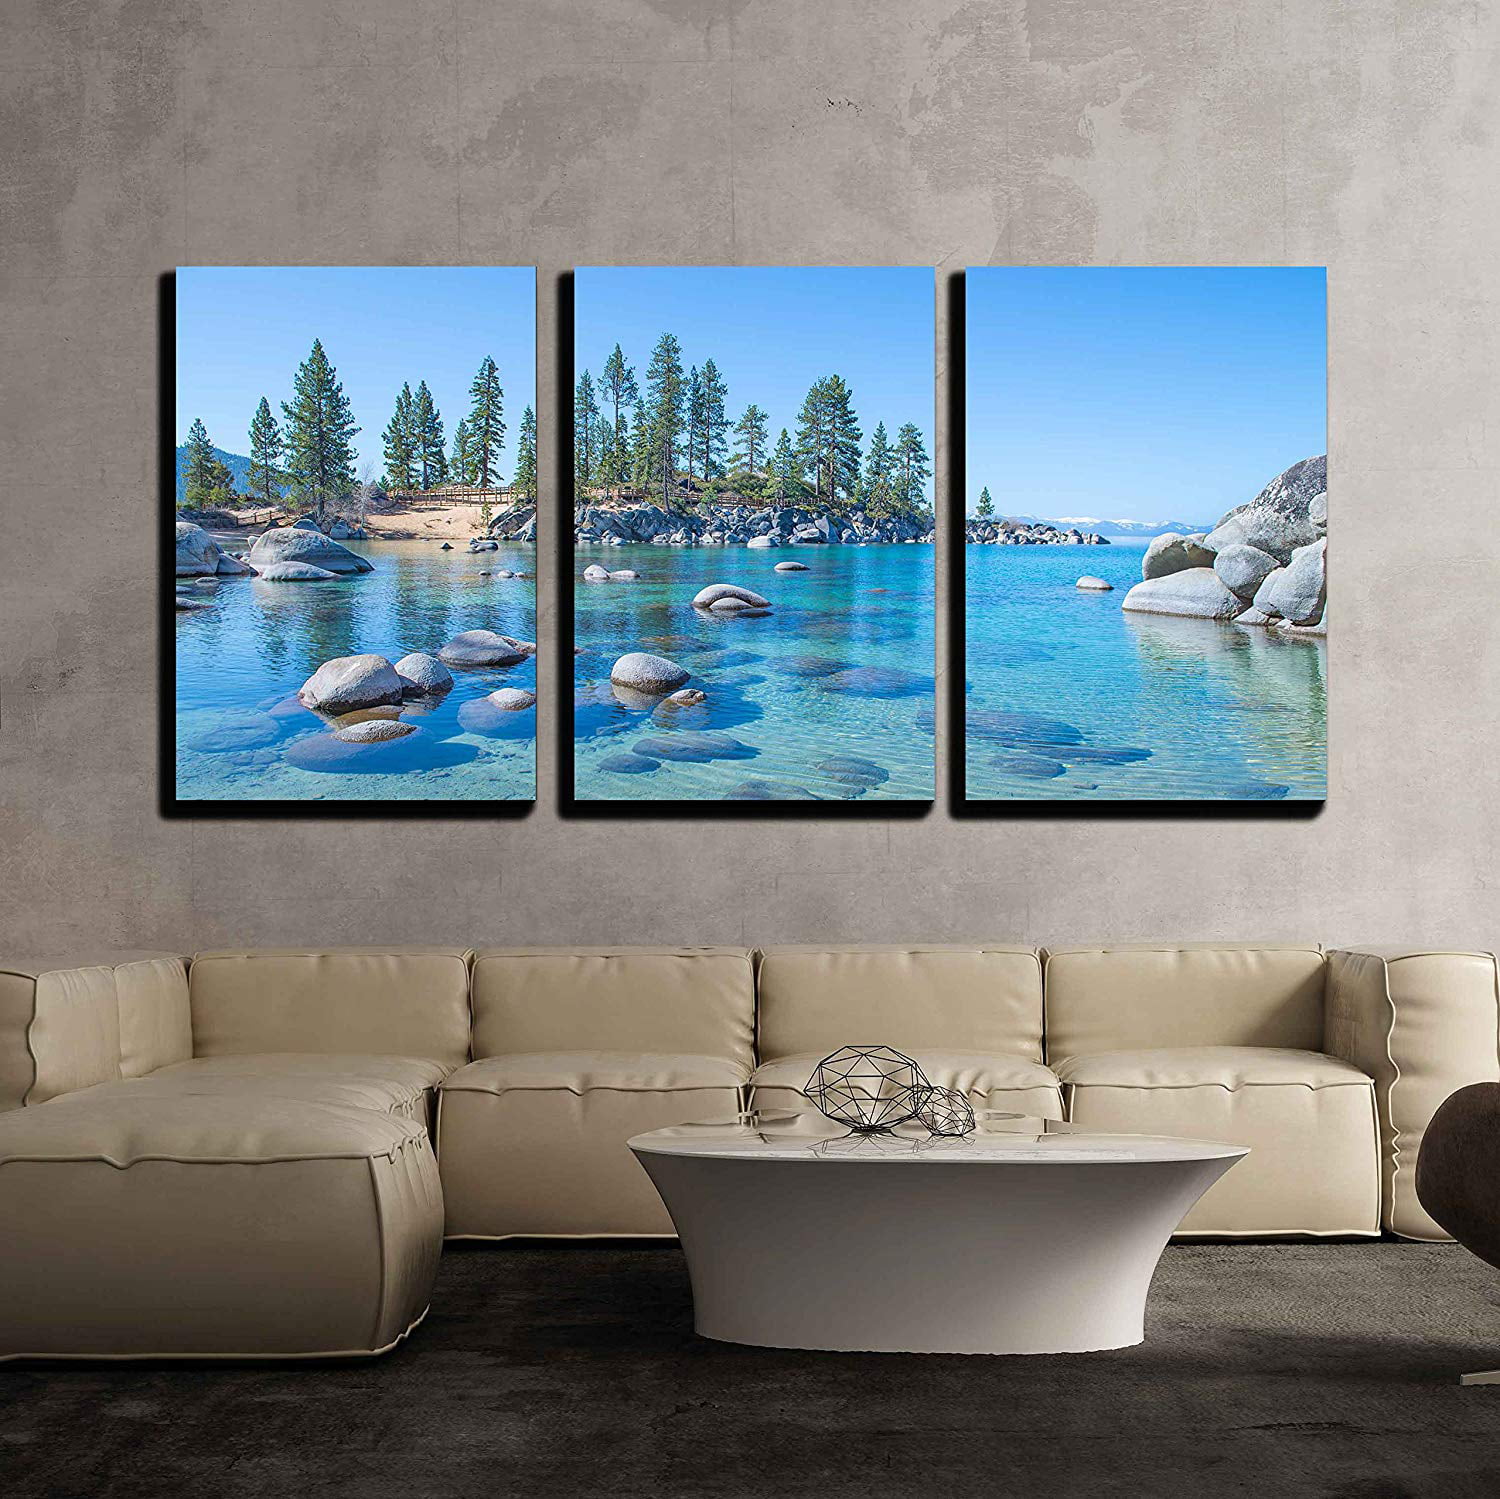 wall26 - 3 Piece Canvas Wall Art - Beautiful Blue Clear Water on the